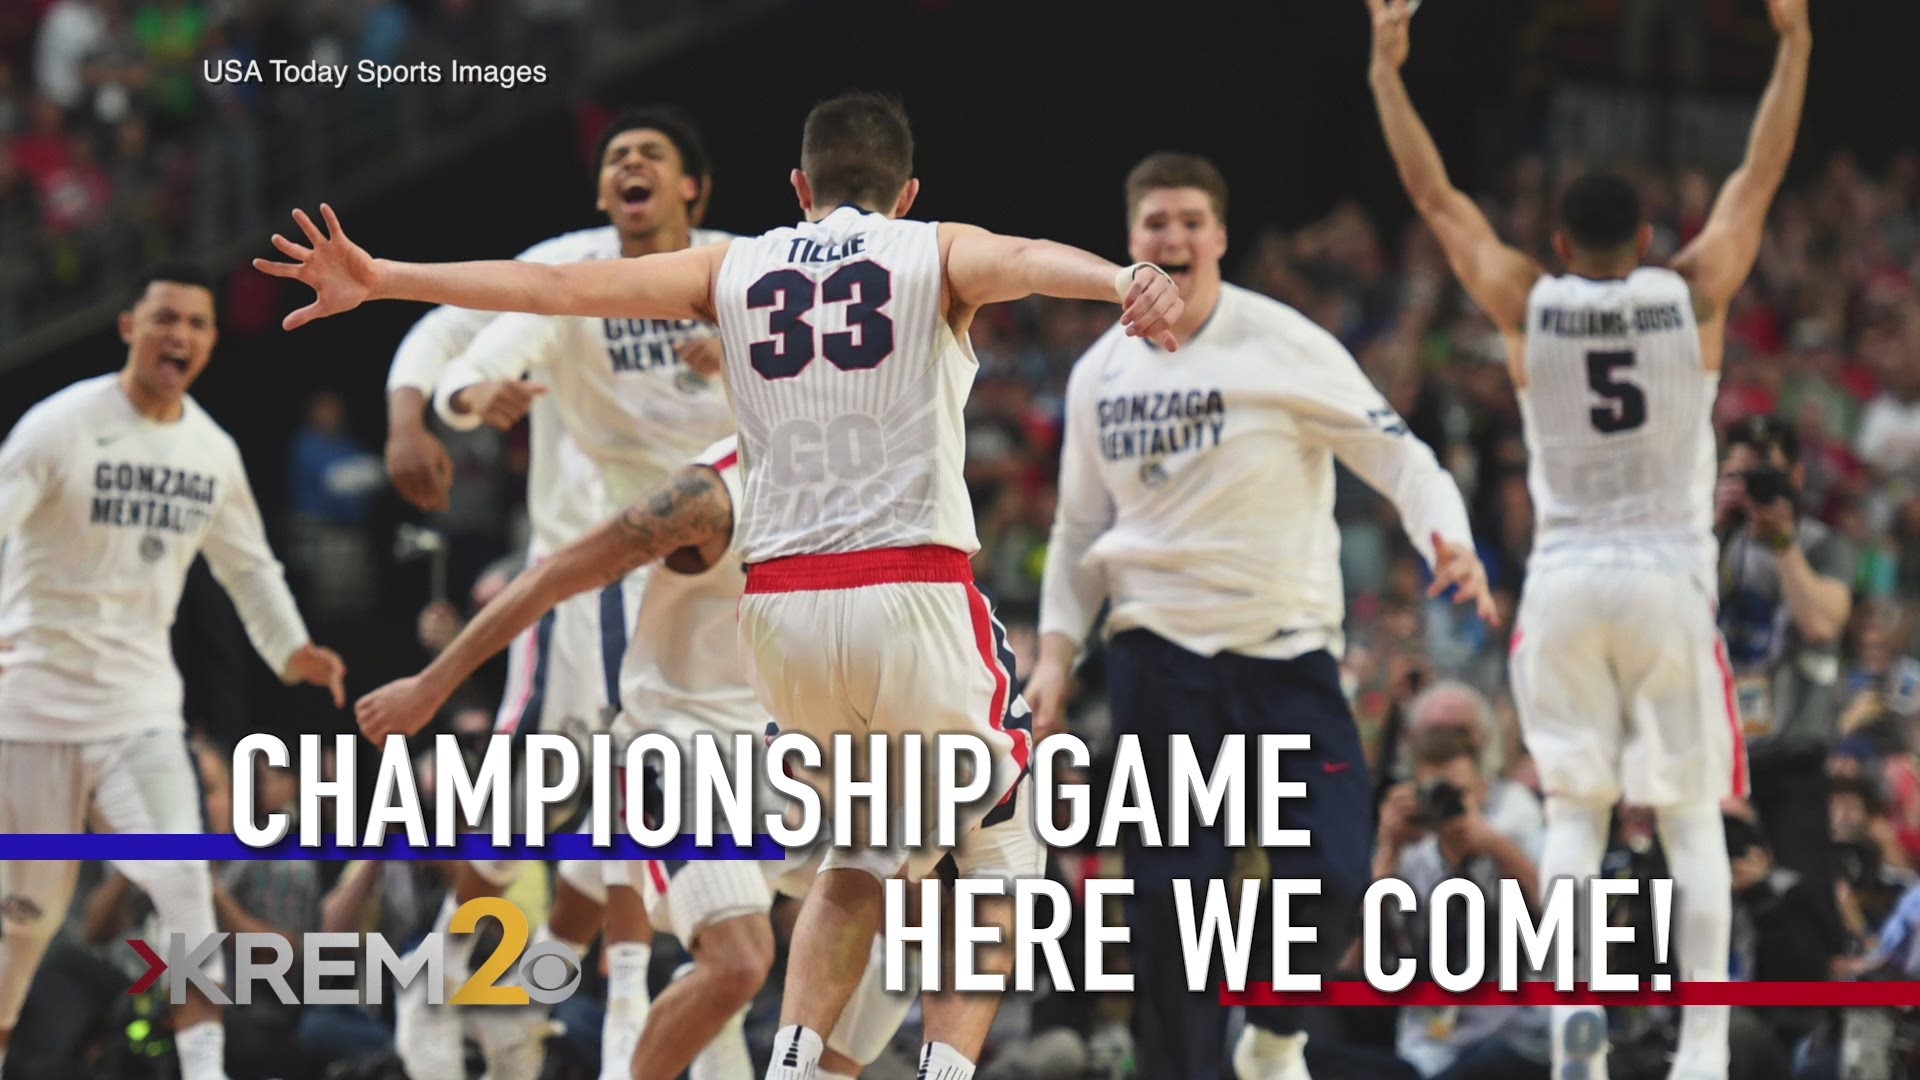 Gonzaga beat out South Carolina in a nail biter game Saturday and will advance to the national championship!! (4/1/17)